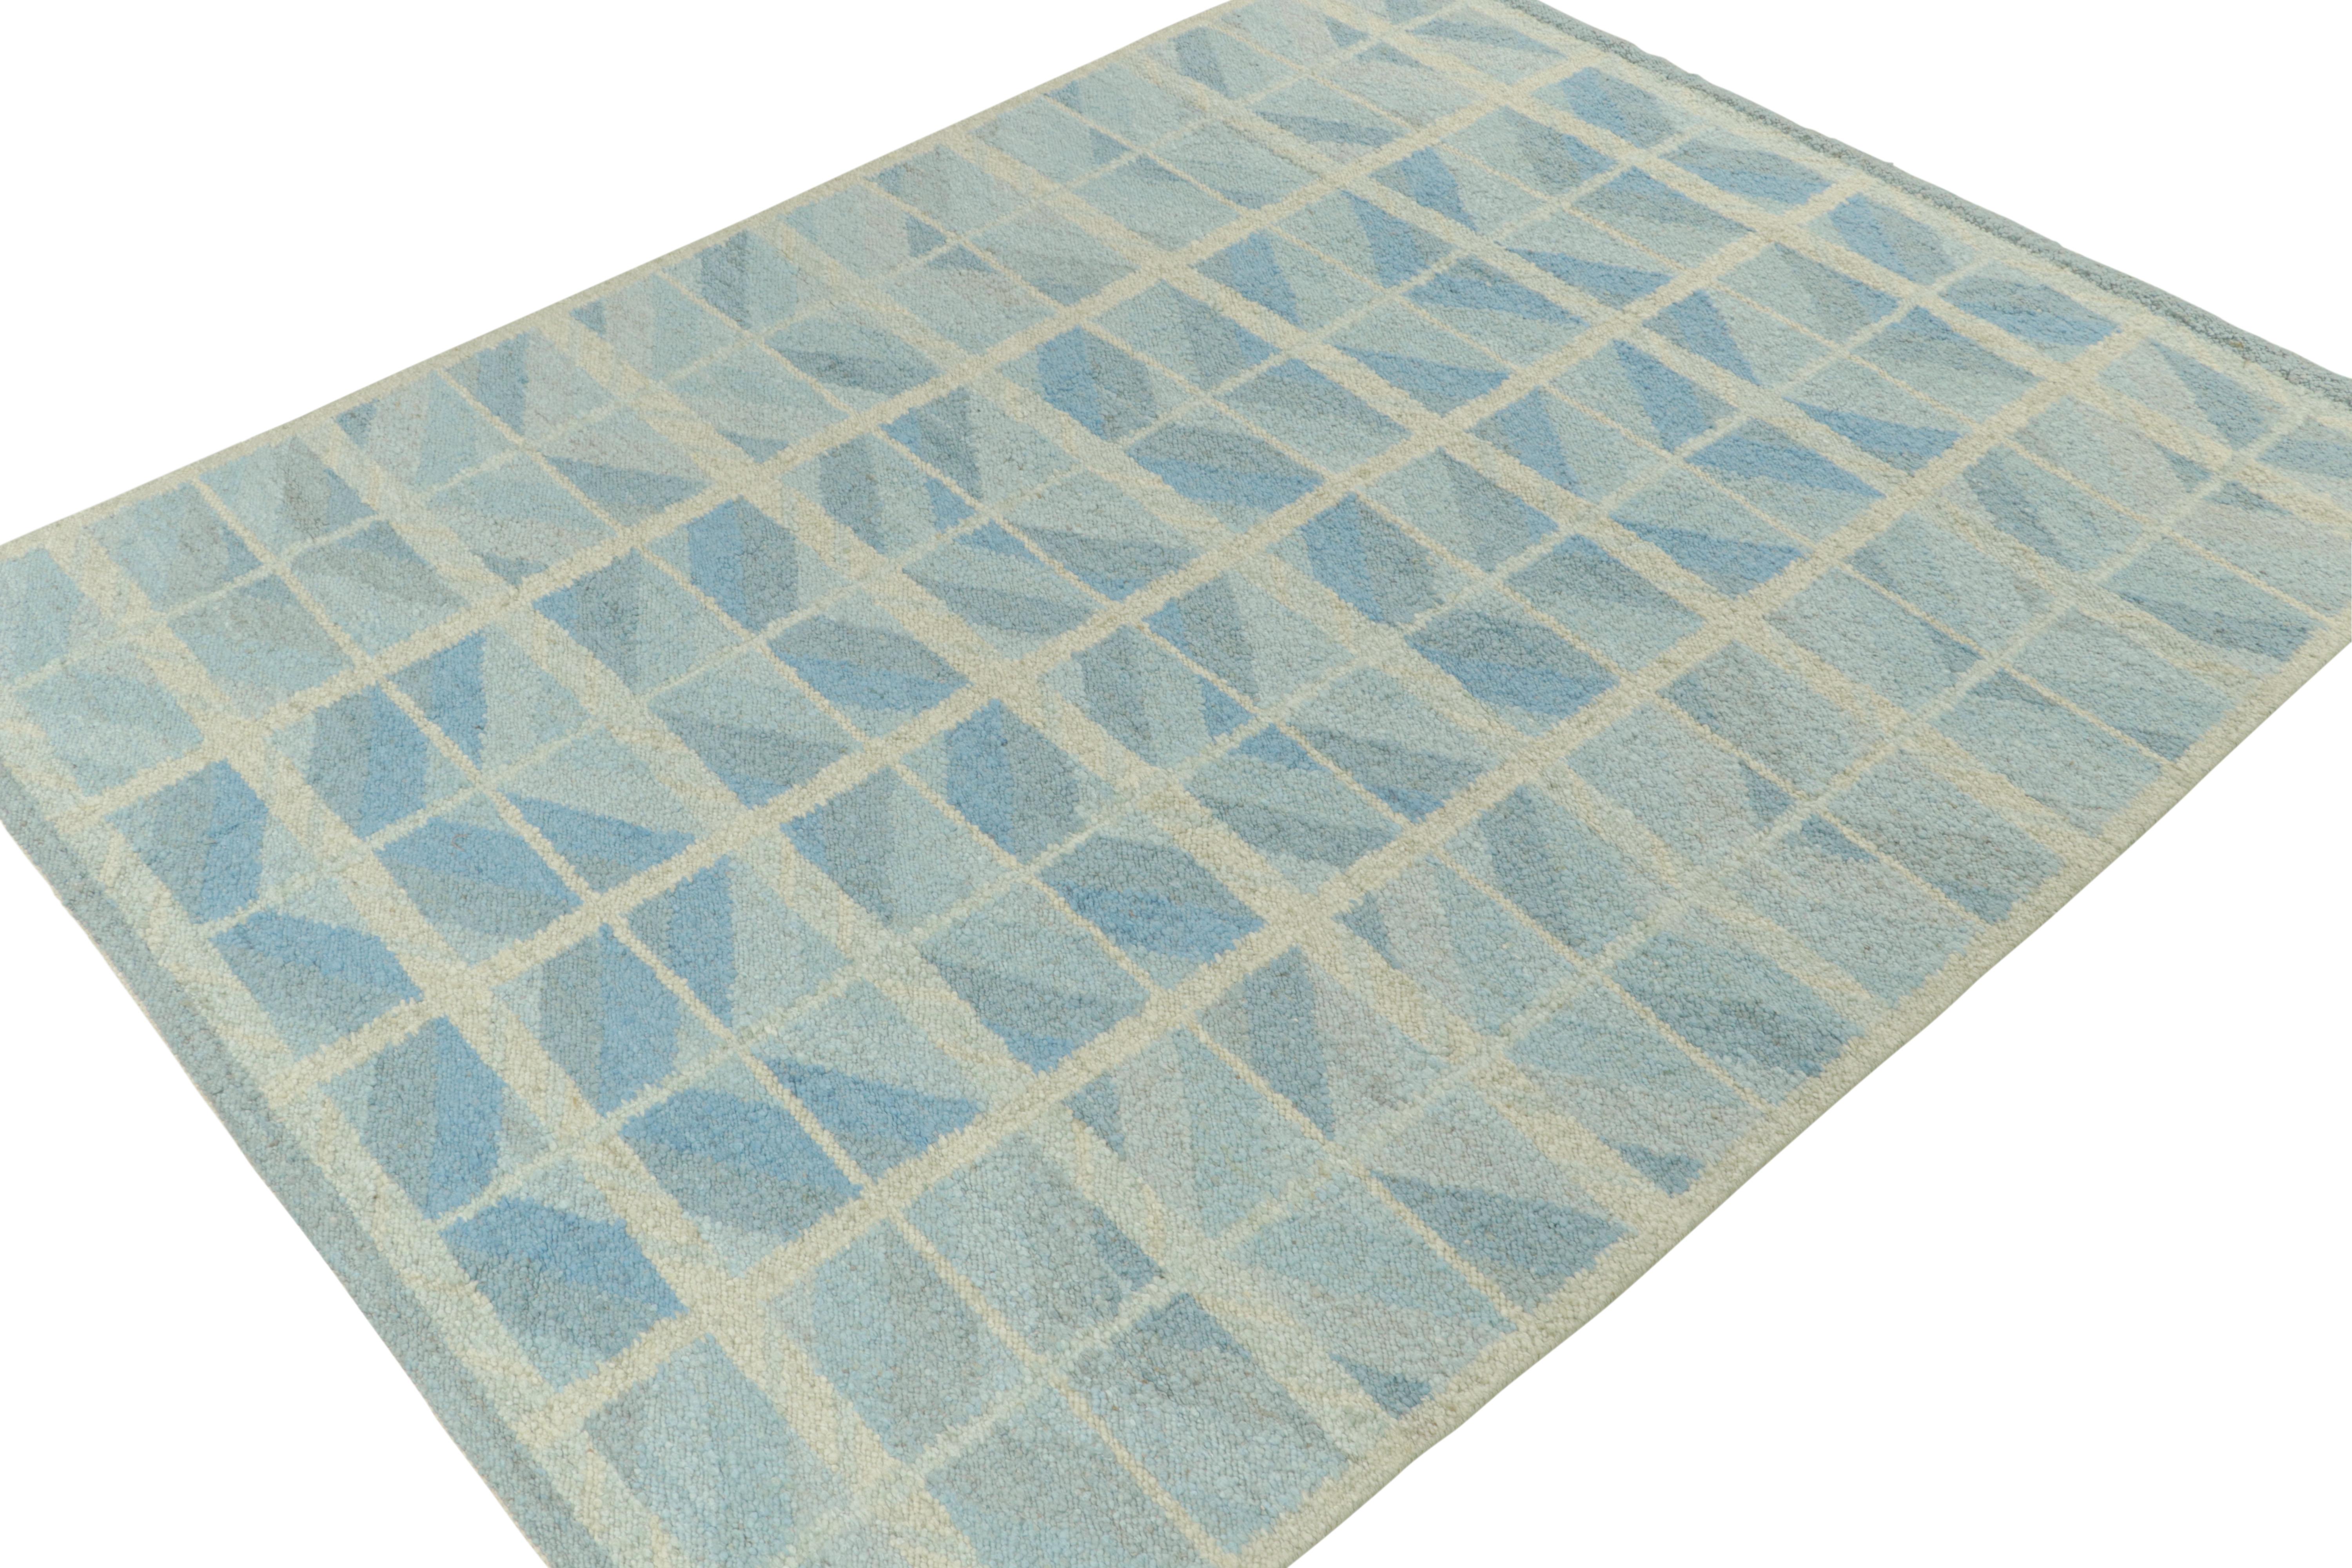 This 9x12 Swedish style kilim is from the inventive “Nu” texture in Rug & Kilim’s award-winning Scandinavian flat weave collection. Handwoven in wool. 

Further On the Design: 

This rug enjoys a boucle-like texture of blended yarns, and a look